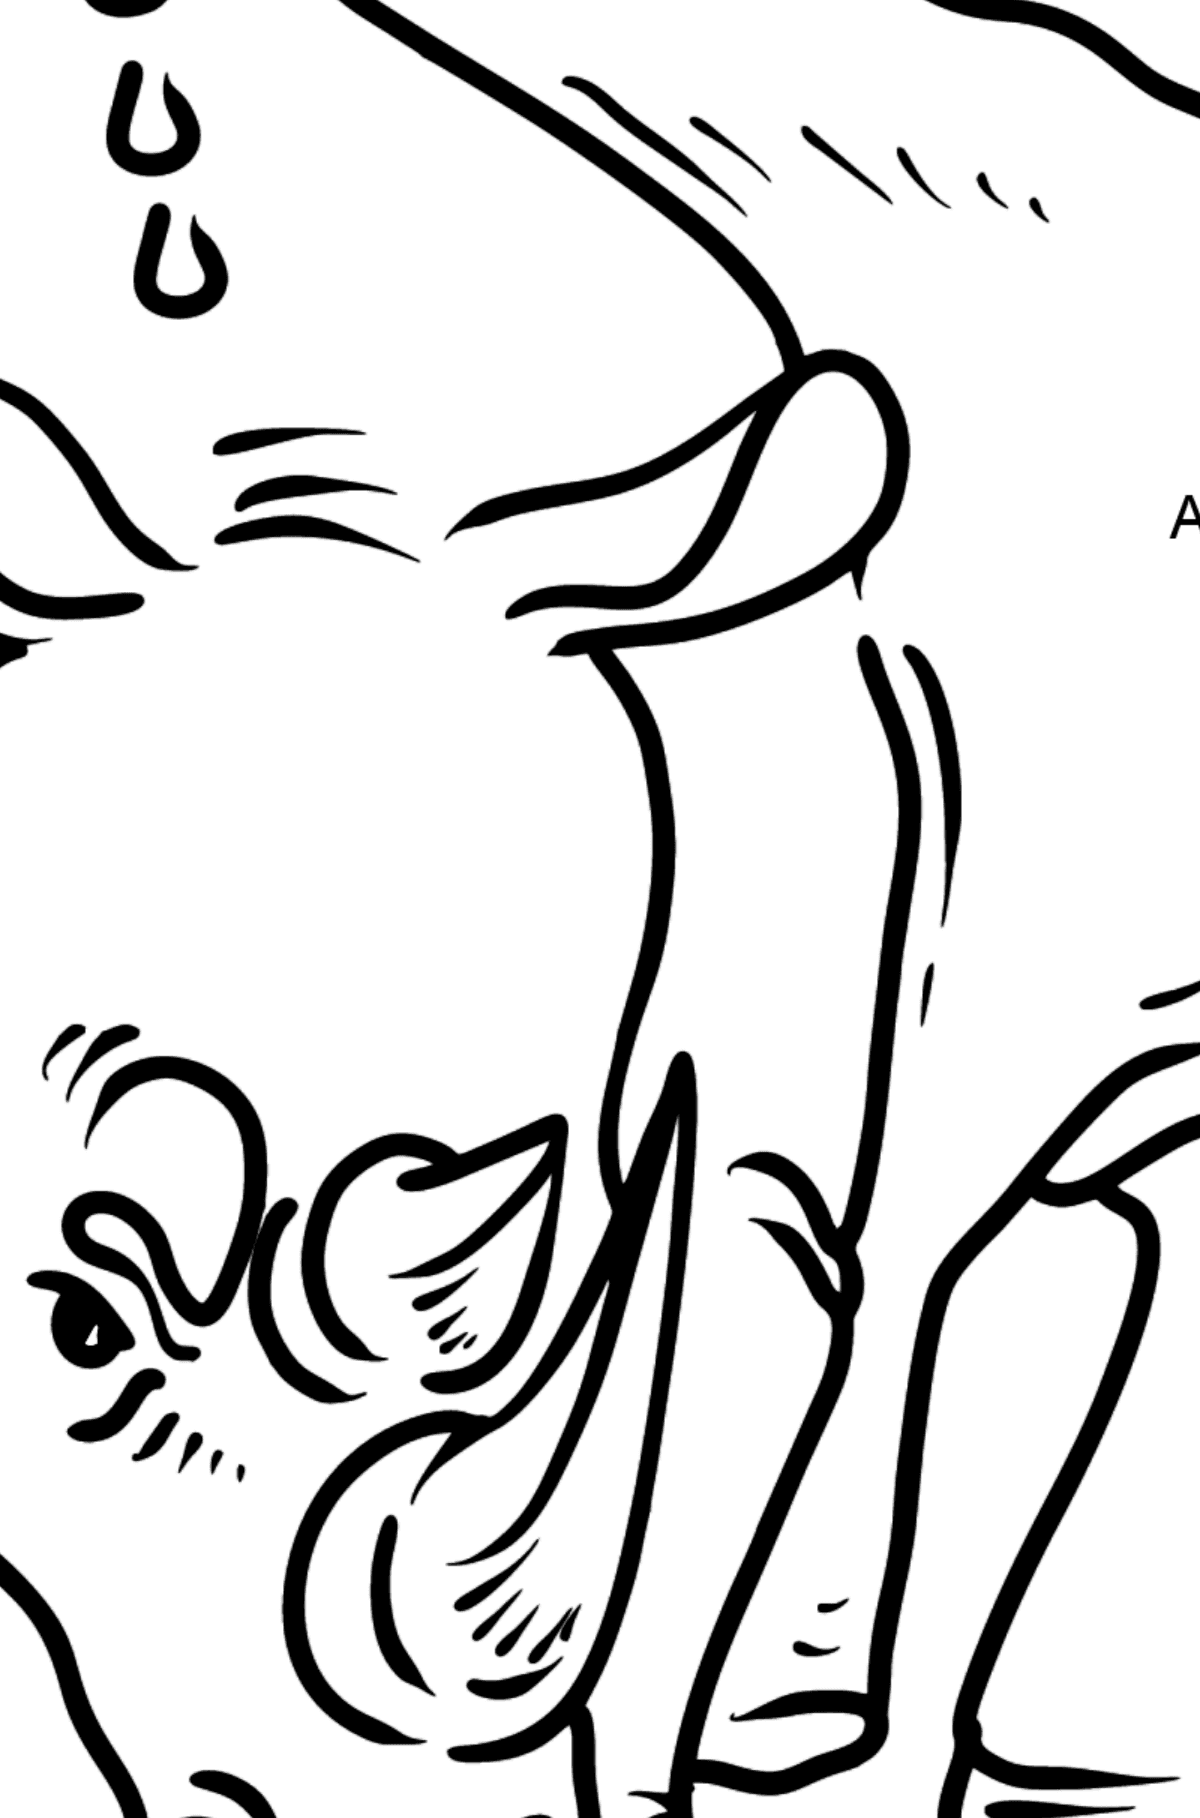 Rhino coloring page - Coloring by Letters for Kids